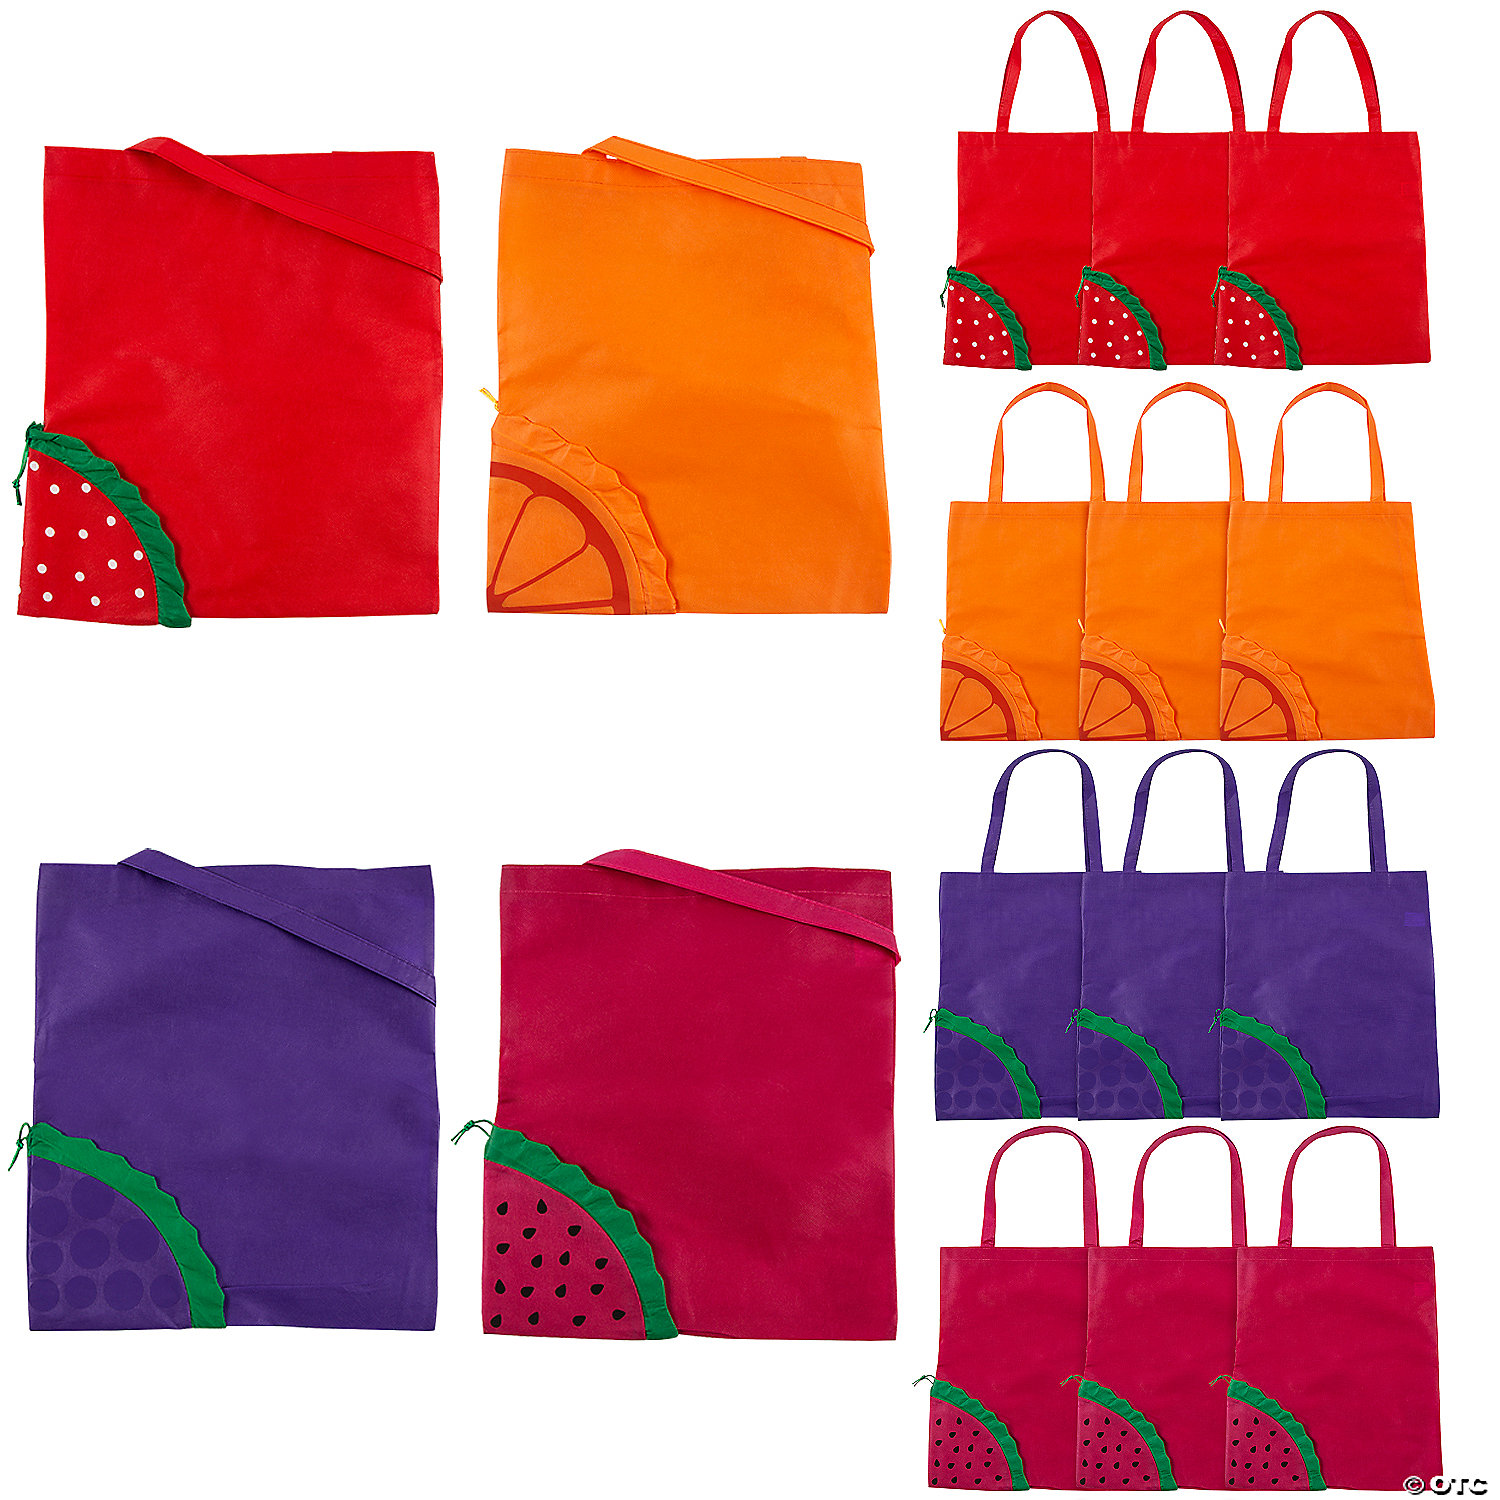 Details about   10PCS Fruits Reusable Grocery Shopping Tote Bags Folding Pouch Storage Bags 